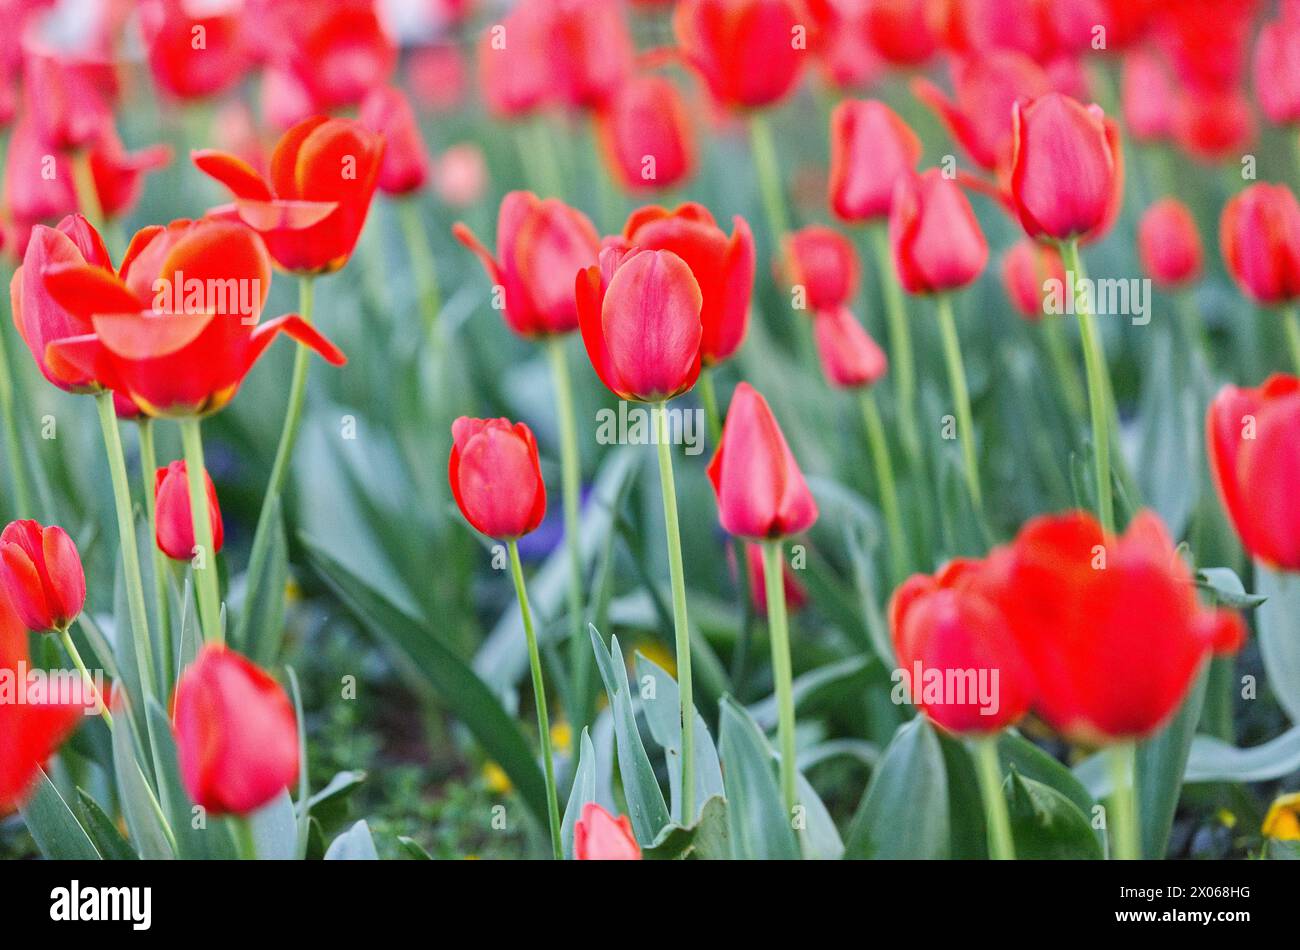 Red tulips, common name for all species, hybrids and cultivars of this genus, Tulipa is a genus of plants Stock Photo